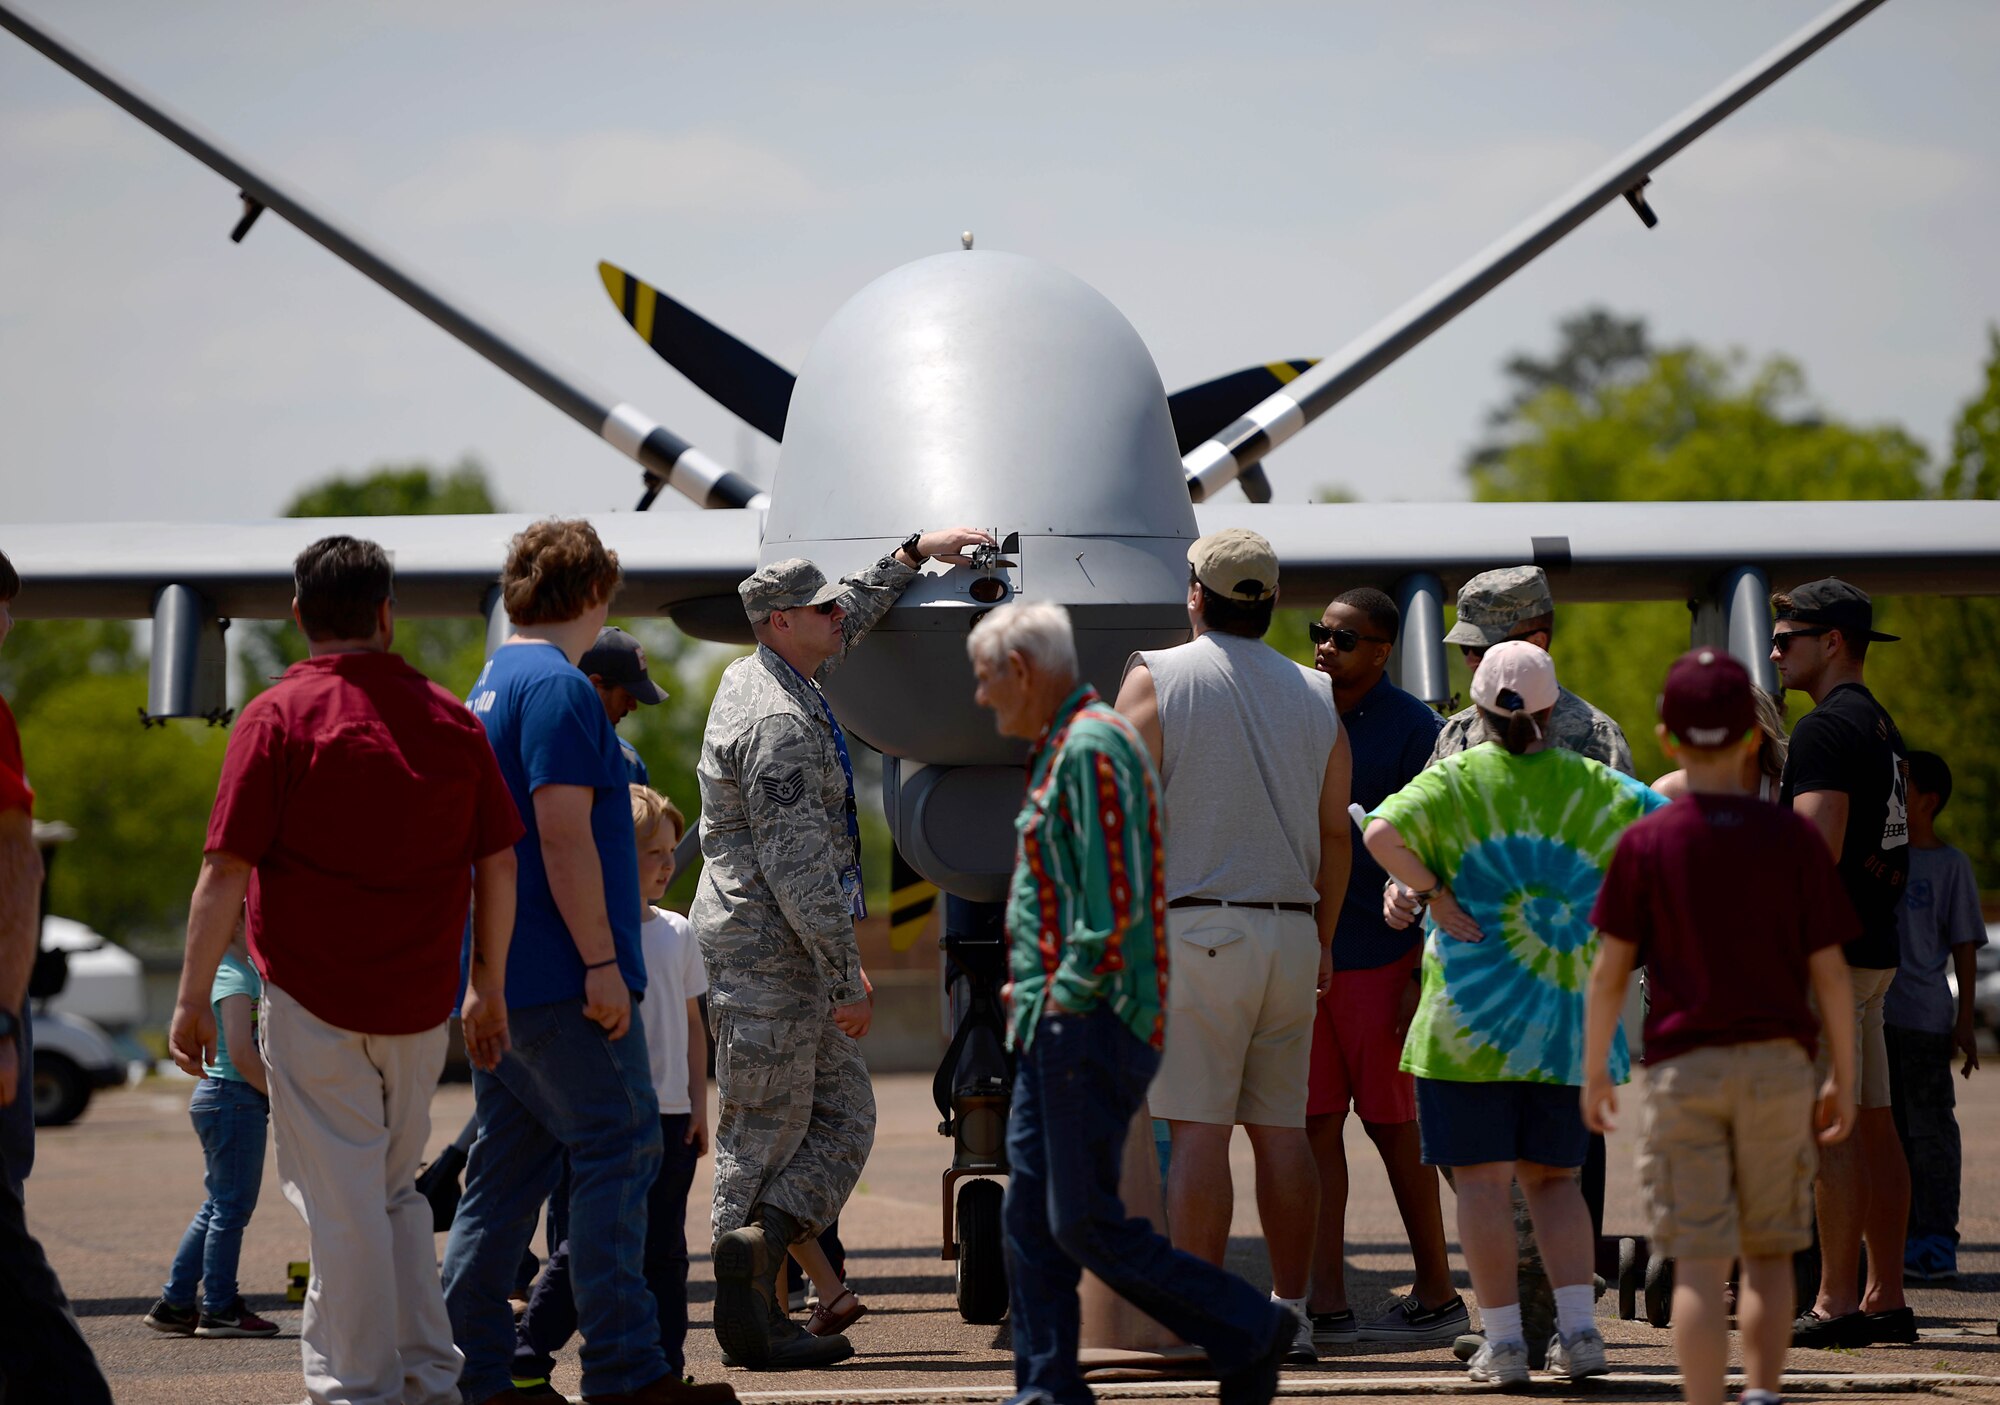 Airmen assigned to the 432nd Wing/432nd Air Expeditionary Wing from Creech Air Force Base, Nev., speak to the attendees of the 2018 Wings Over Columbus Air and Space Show about the MQ-9 Reaper and it’s capabilities April 21, 2018, at Columbus Air Force Base, Mississippi. This was the first Air Force event the MQ-9 and its aircrew attended during the 2018 season and marked the first time the aircraft was at Columbus Air Force Base. (U.S. Air Force photo by Airman 1st Class Keith Holcomb)